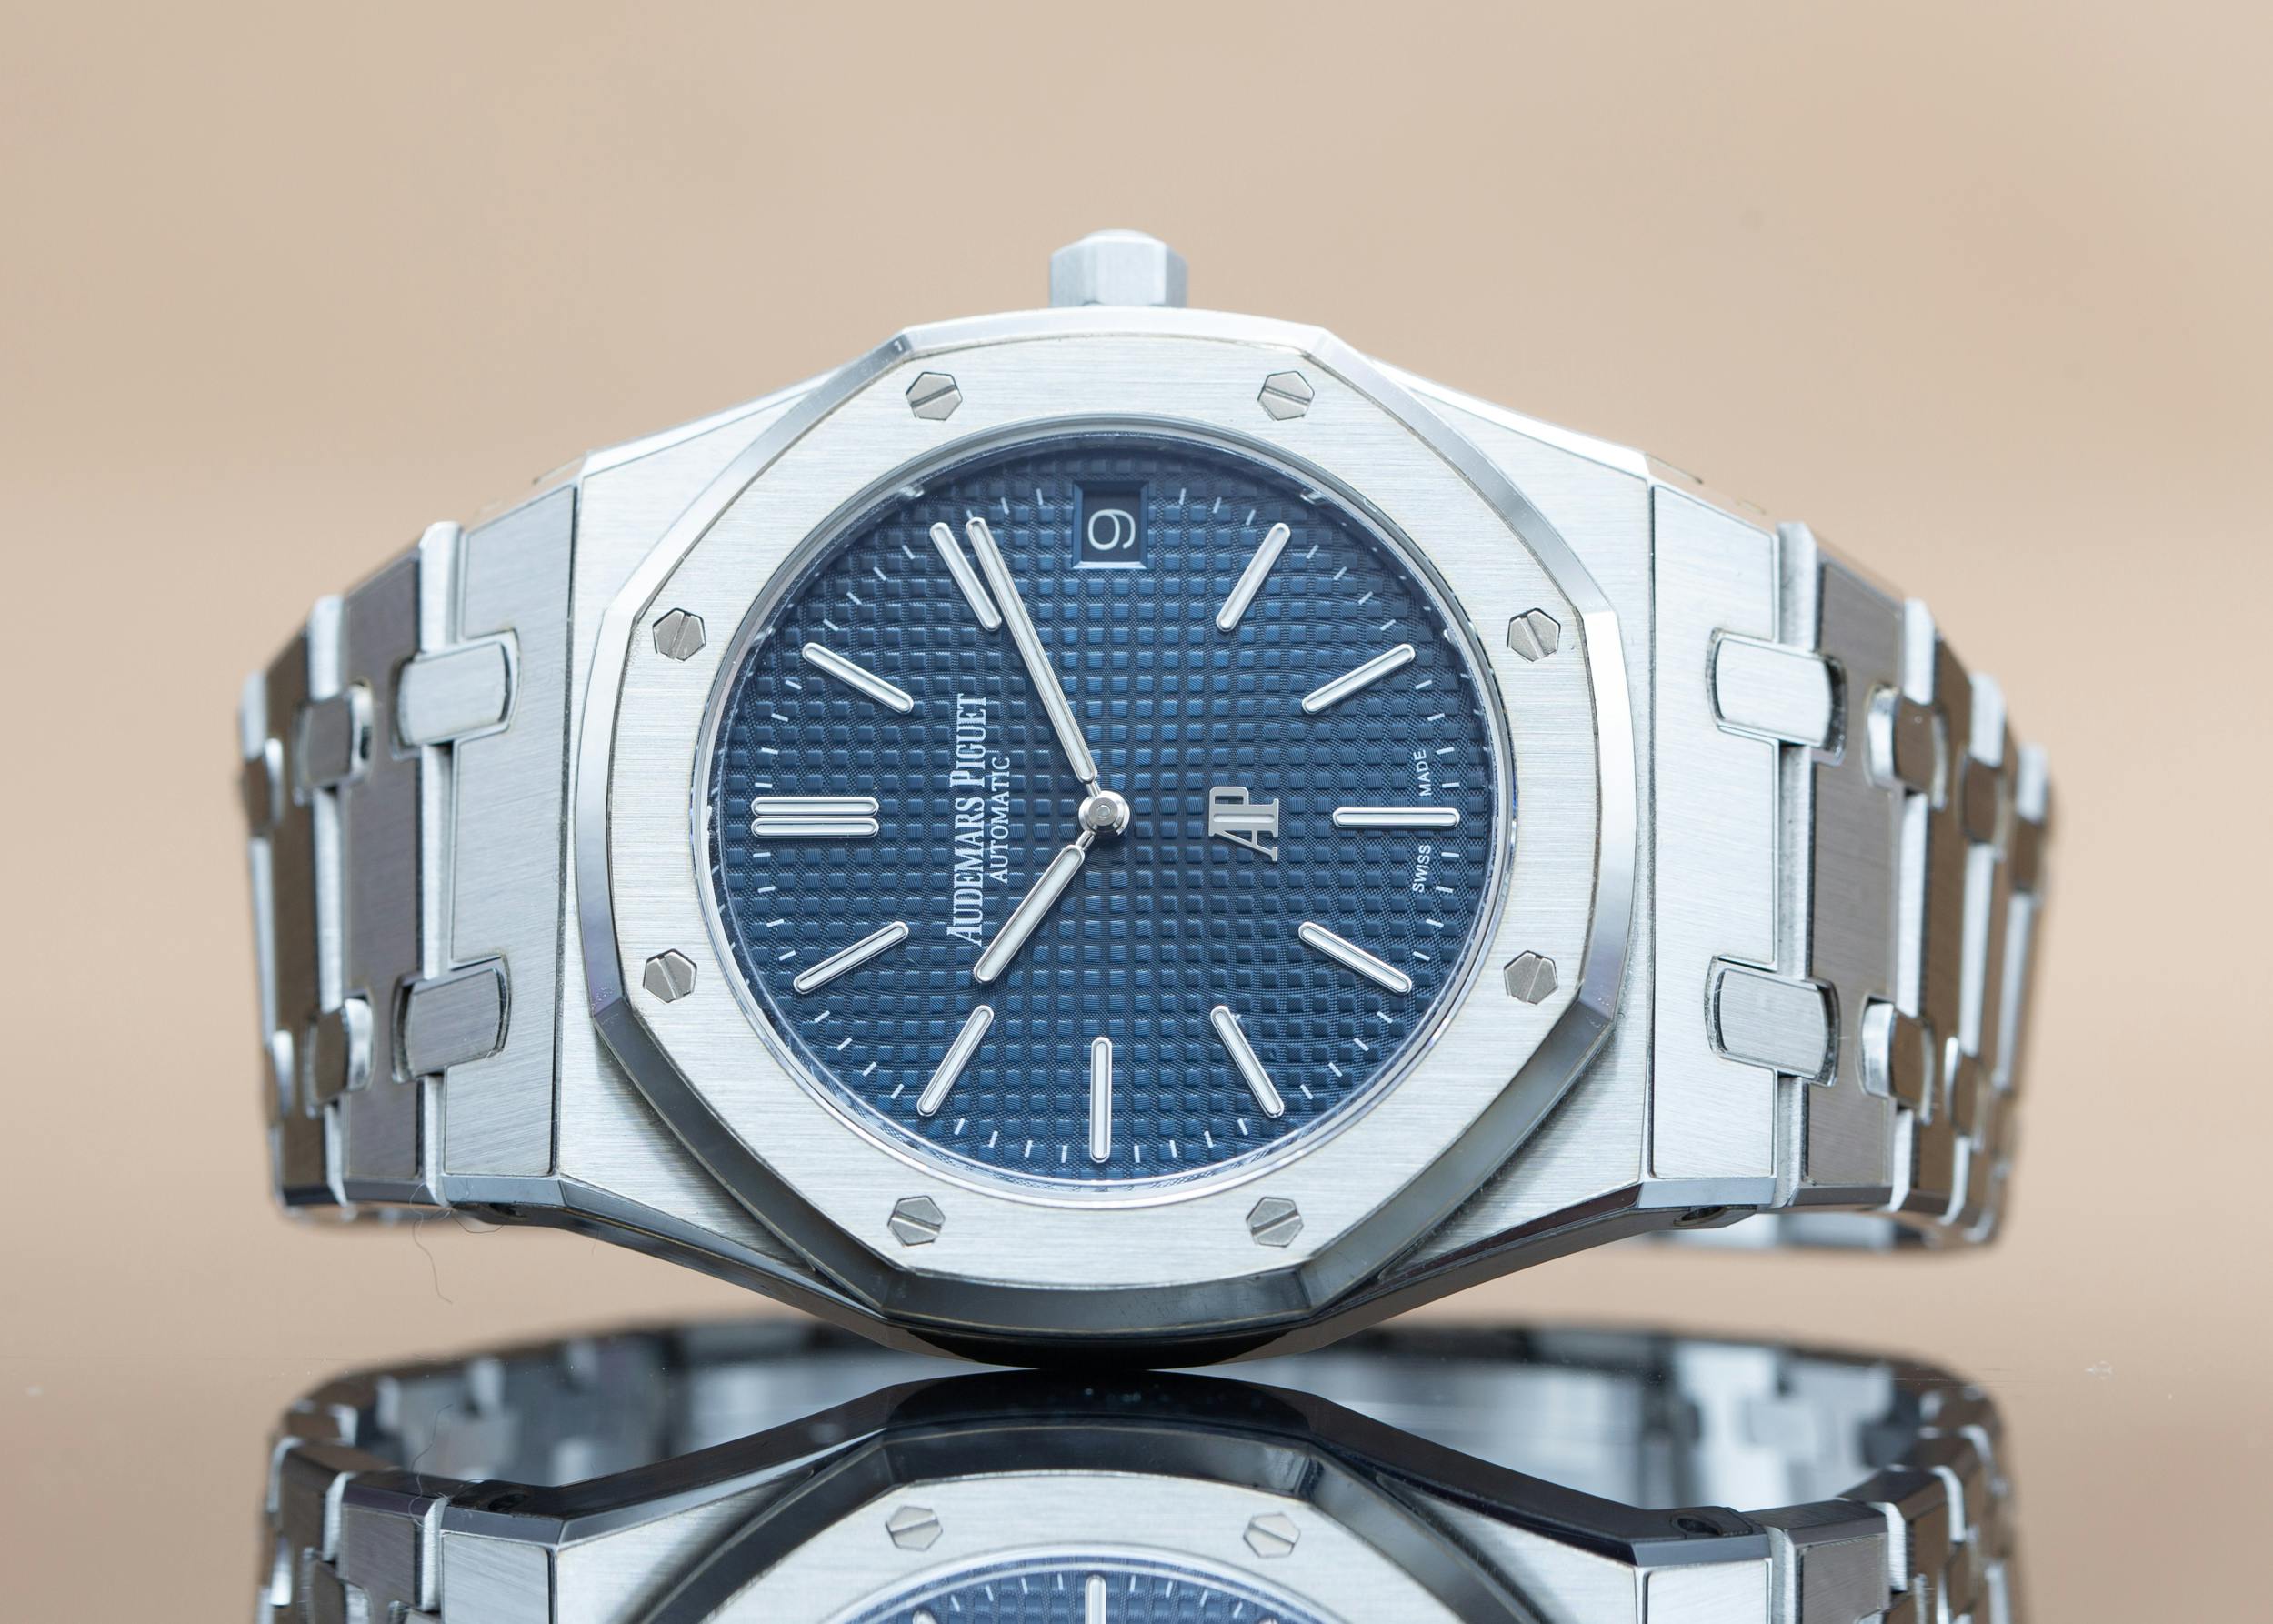 Prices Rise 50% For Audemars Piguet's Royal Oak Jumbo As CEO Says It Will  Be Axed Next Year